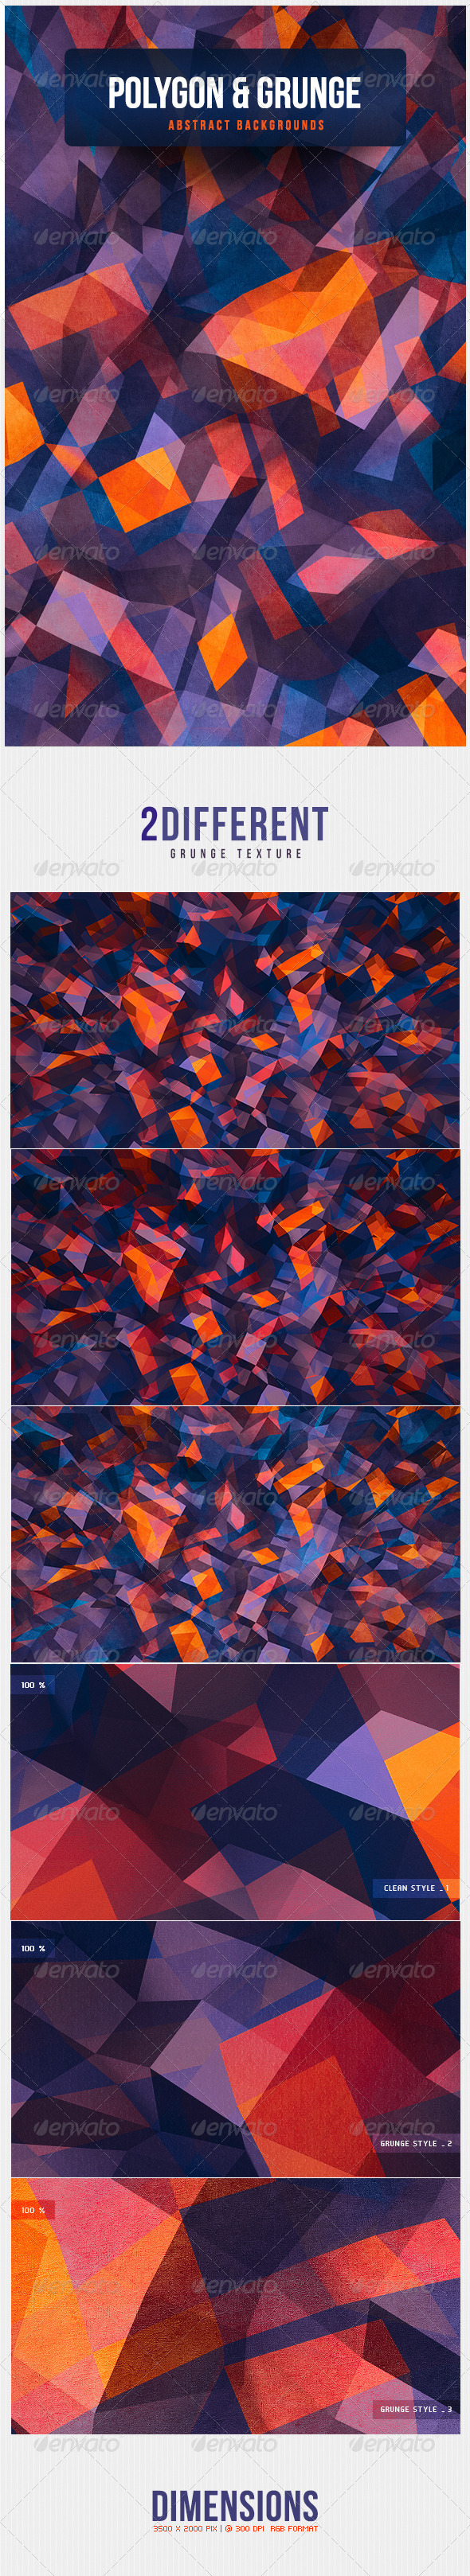 Polygon & Grunge Abstract Backgrounds